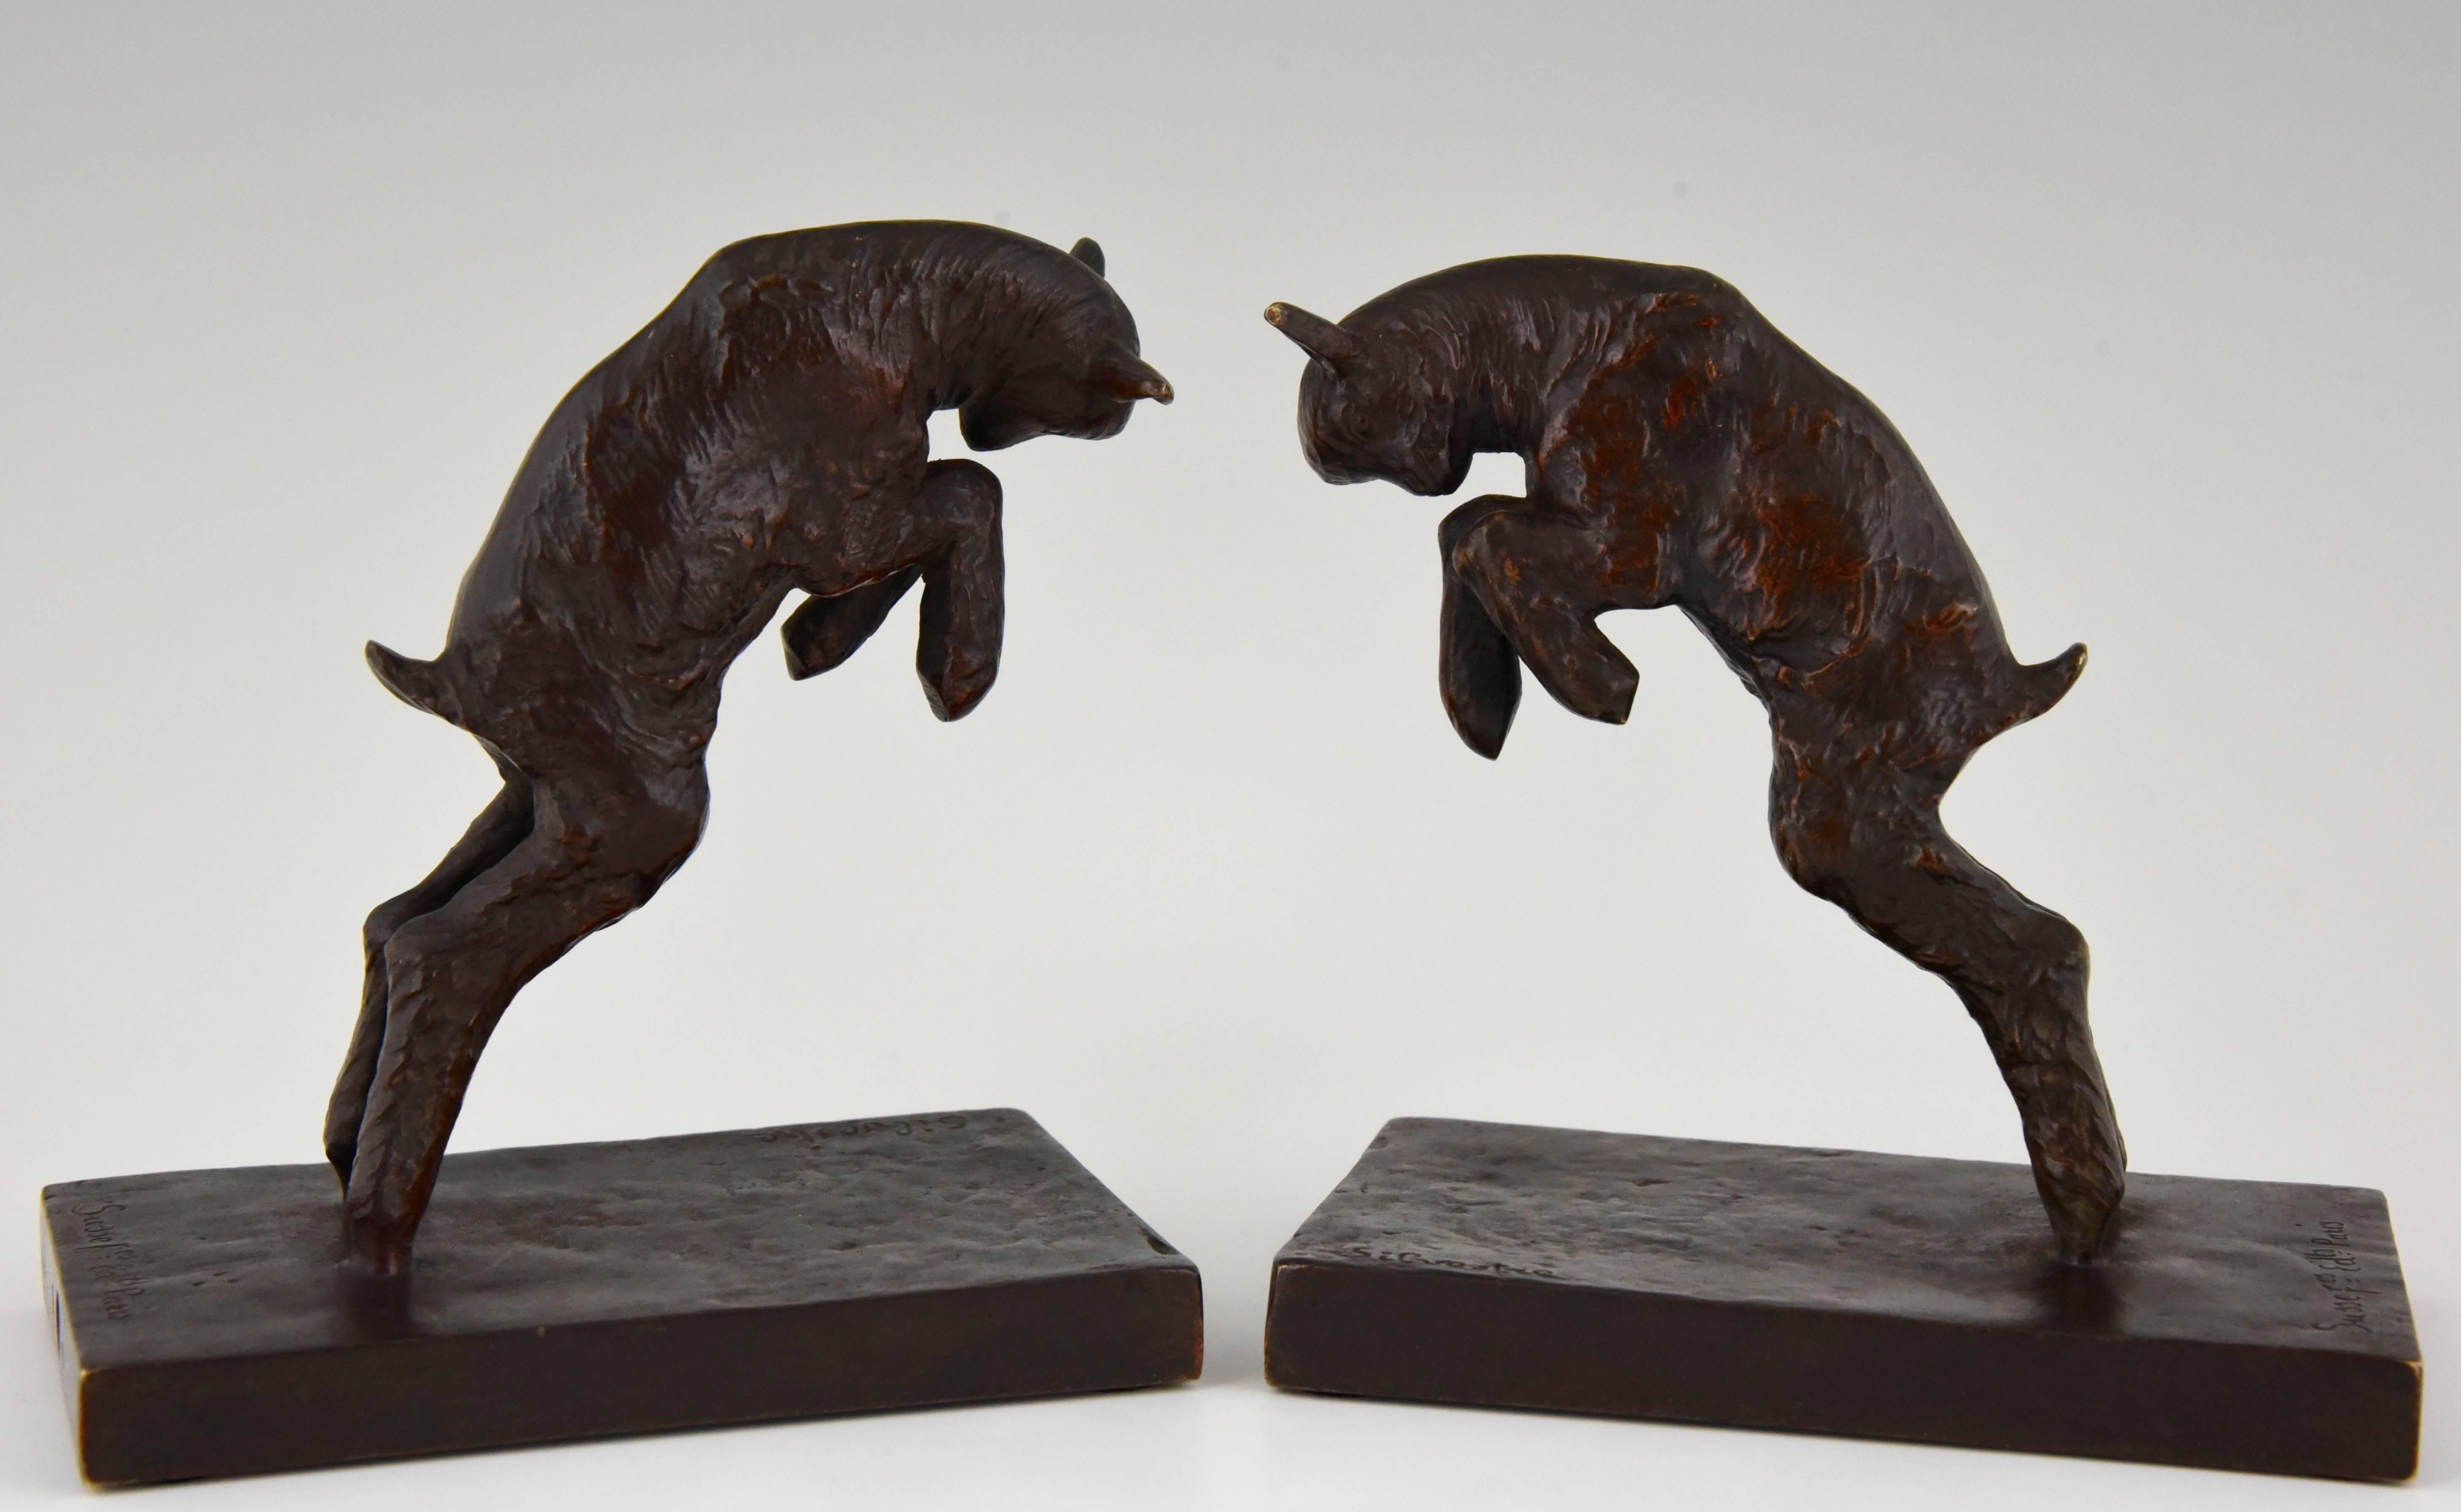 Lovely Art Deco bronze lamb bookends by the French artist Paul Silvestre, cast by Susse Freres, Paris. 

Signature/ marks: Silvestre, foundry mark, Susse Frères, Paris.
Style: Art Deco
Date: 1930
Material: Patinated bronze.
Origin: